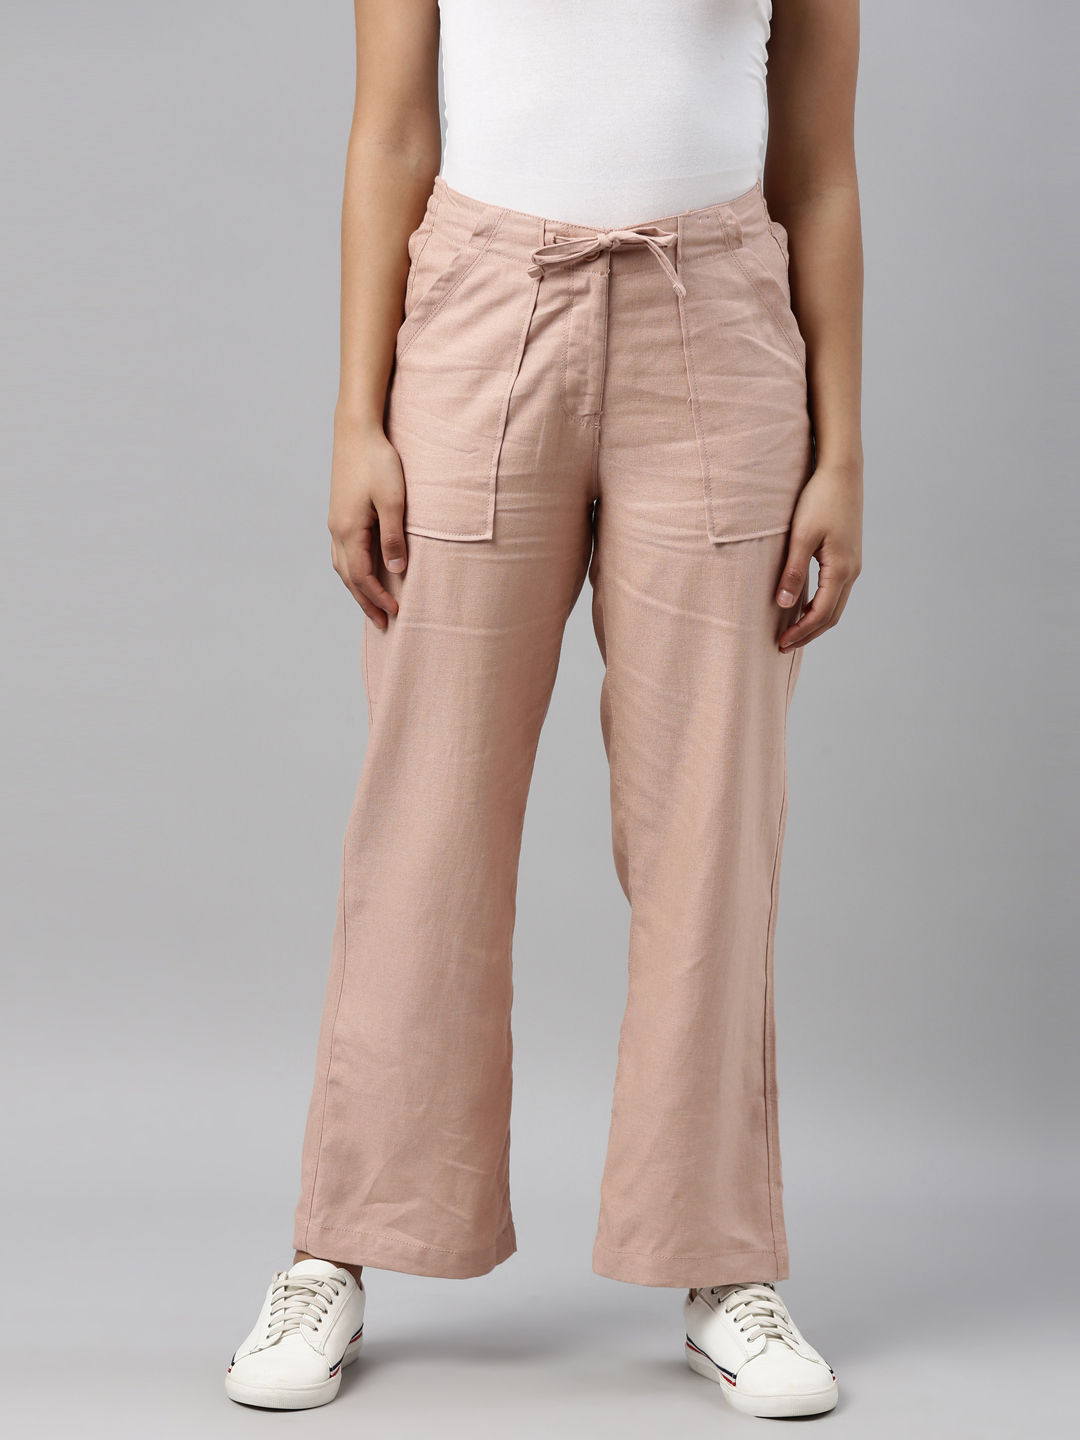 Go Colors Women Solid Dusty Pink Viscose Harem Dhoti Pants Buy Go Colors  Women Solid Dusty Pink Viscose Harem Dhoti Pants Online at Best Price in  India  Nykaa